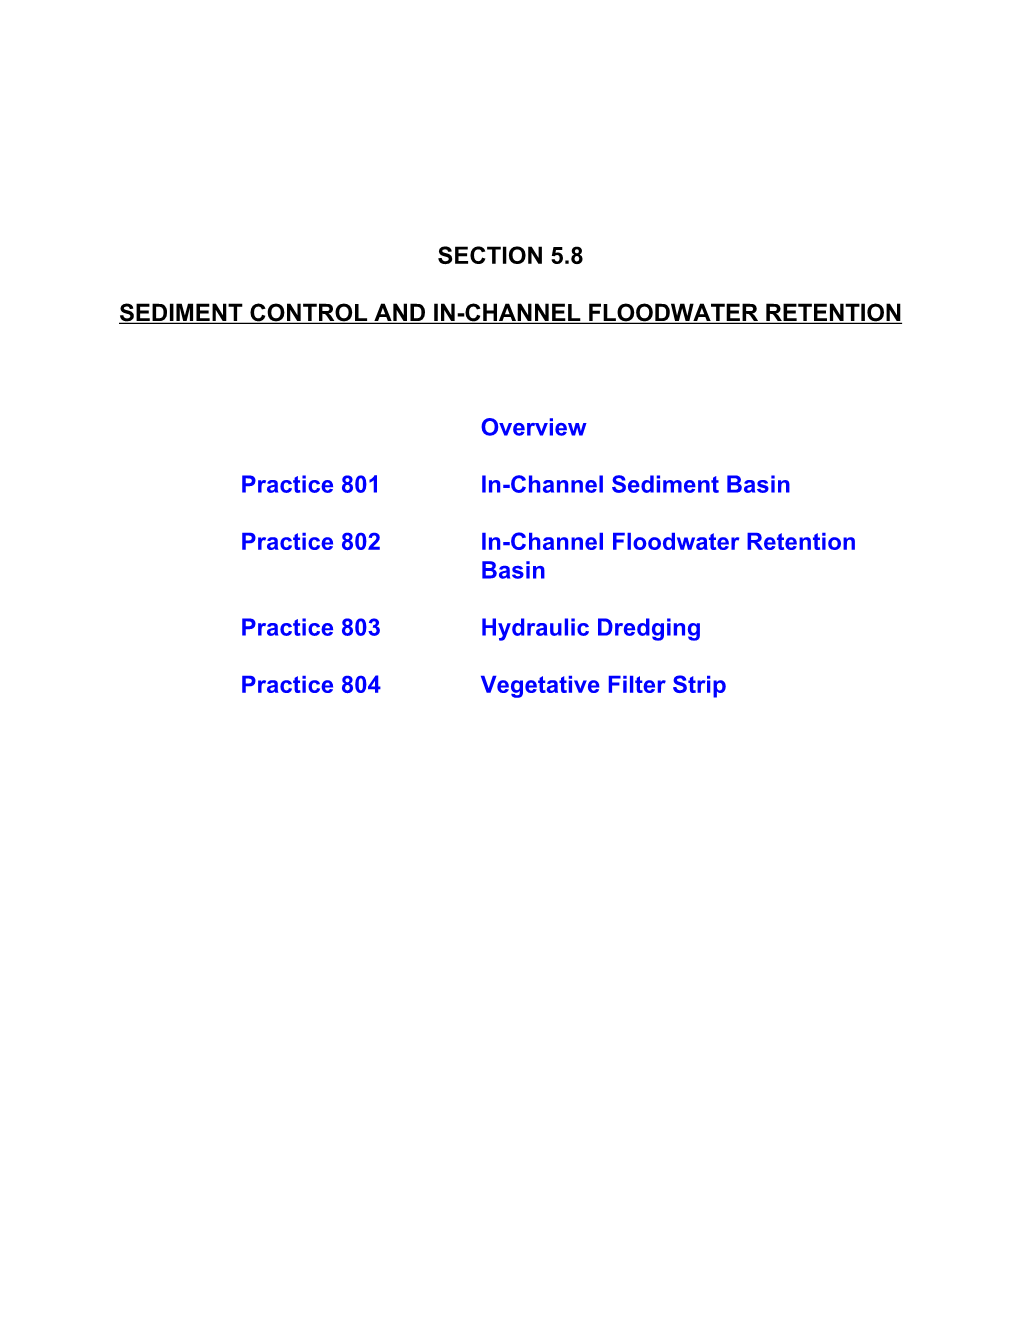 Section 5.8 Sediment Control and In-Channel Floodwater Retention